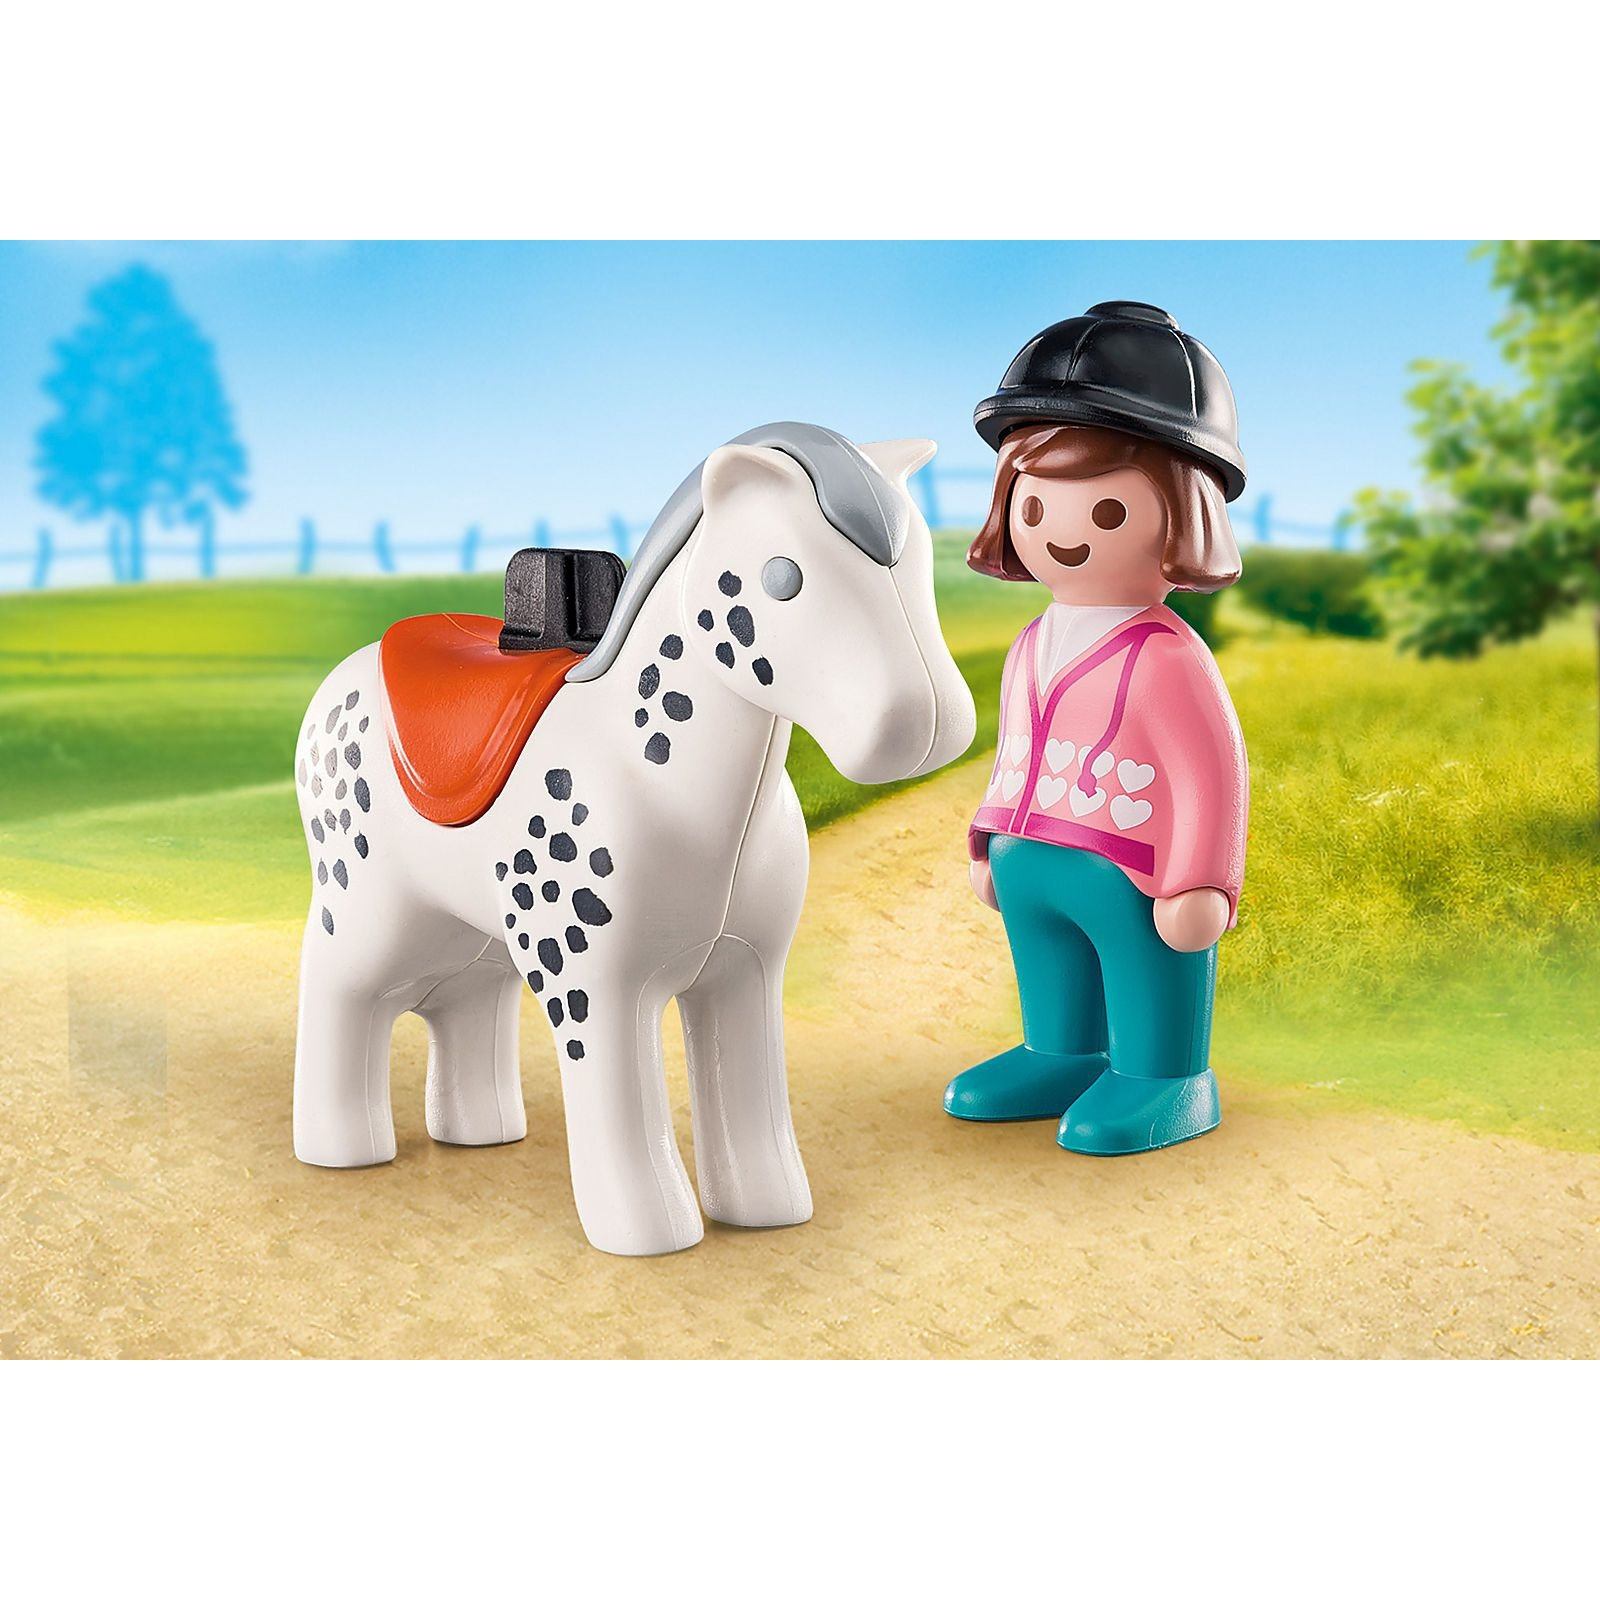 Playmobil 1.2.3. Rider with Horse